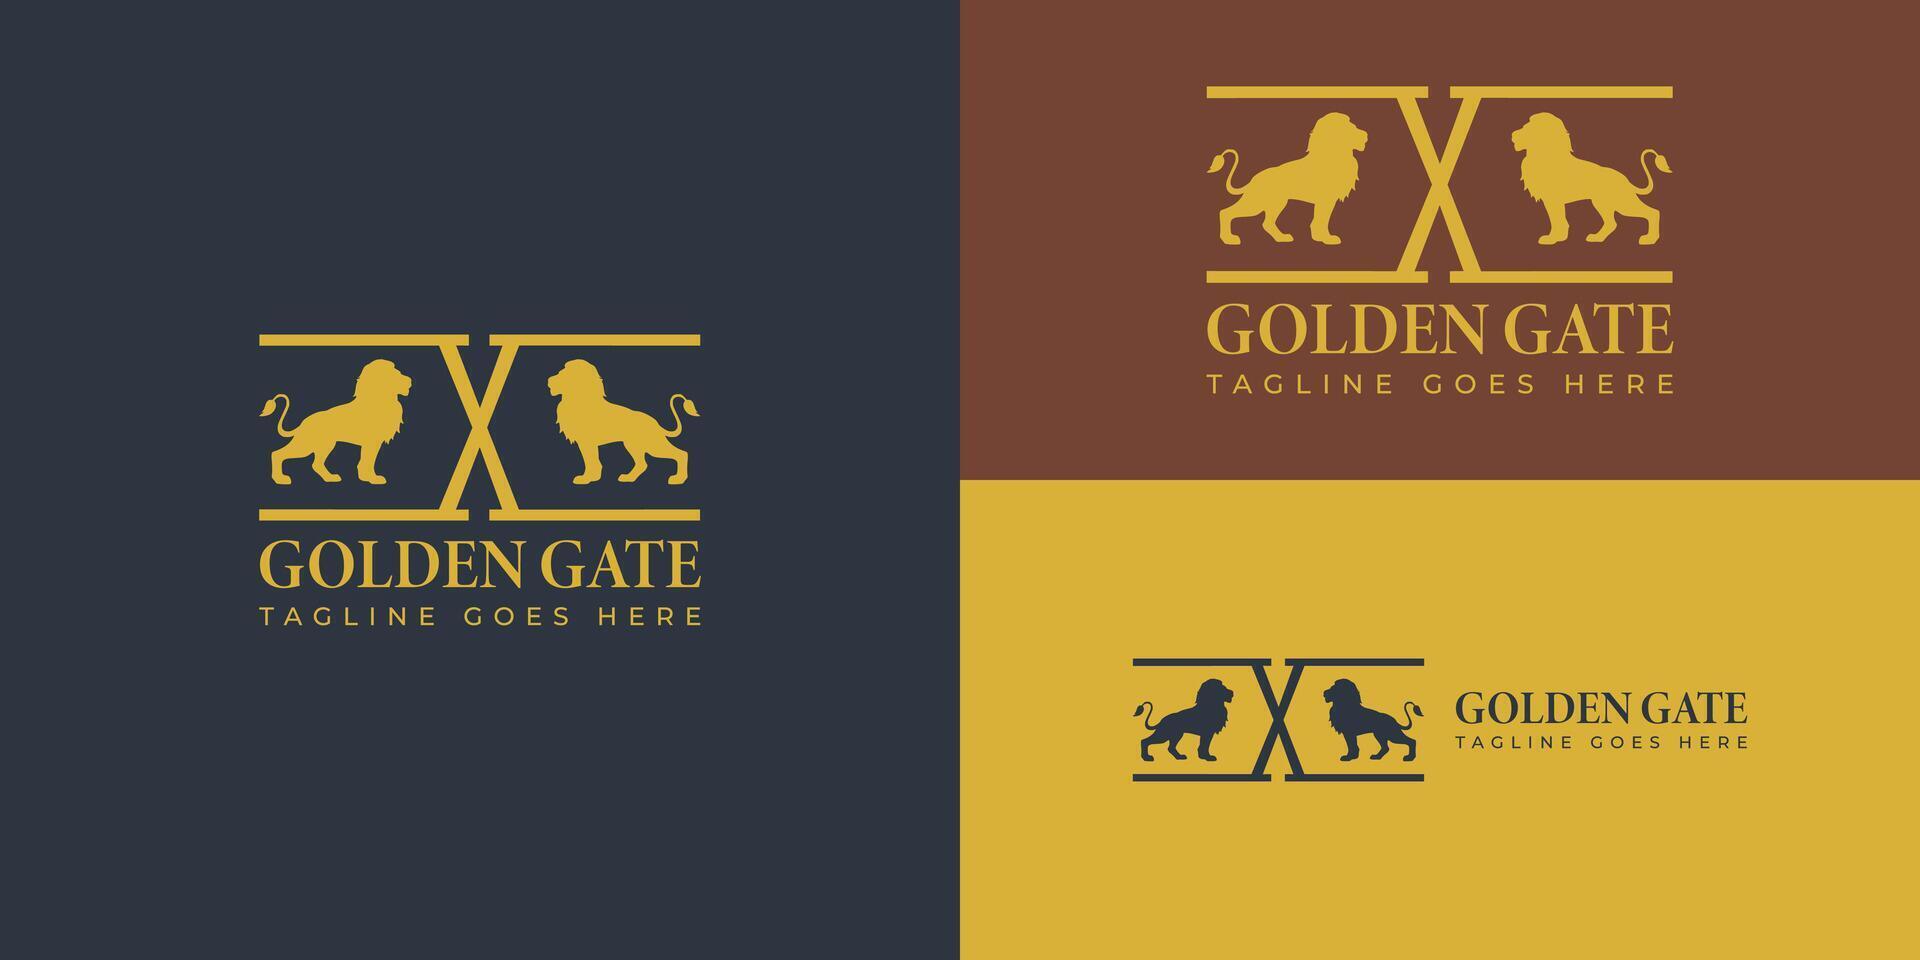 Golden Gate Lion Logo applied for the jewelry business. Royal Lion King Gate Door Knocker with Premium Shield Shape for Guard Protect logo design vector